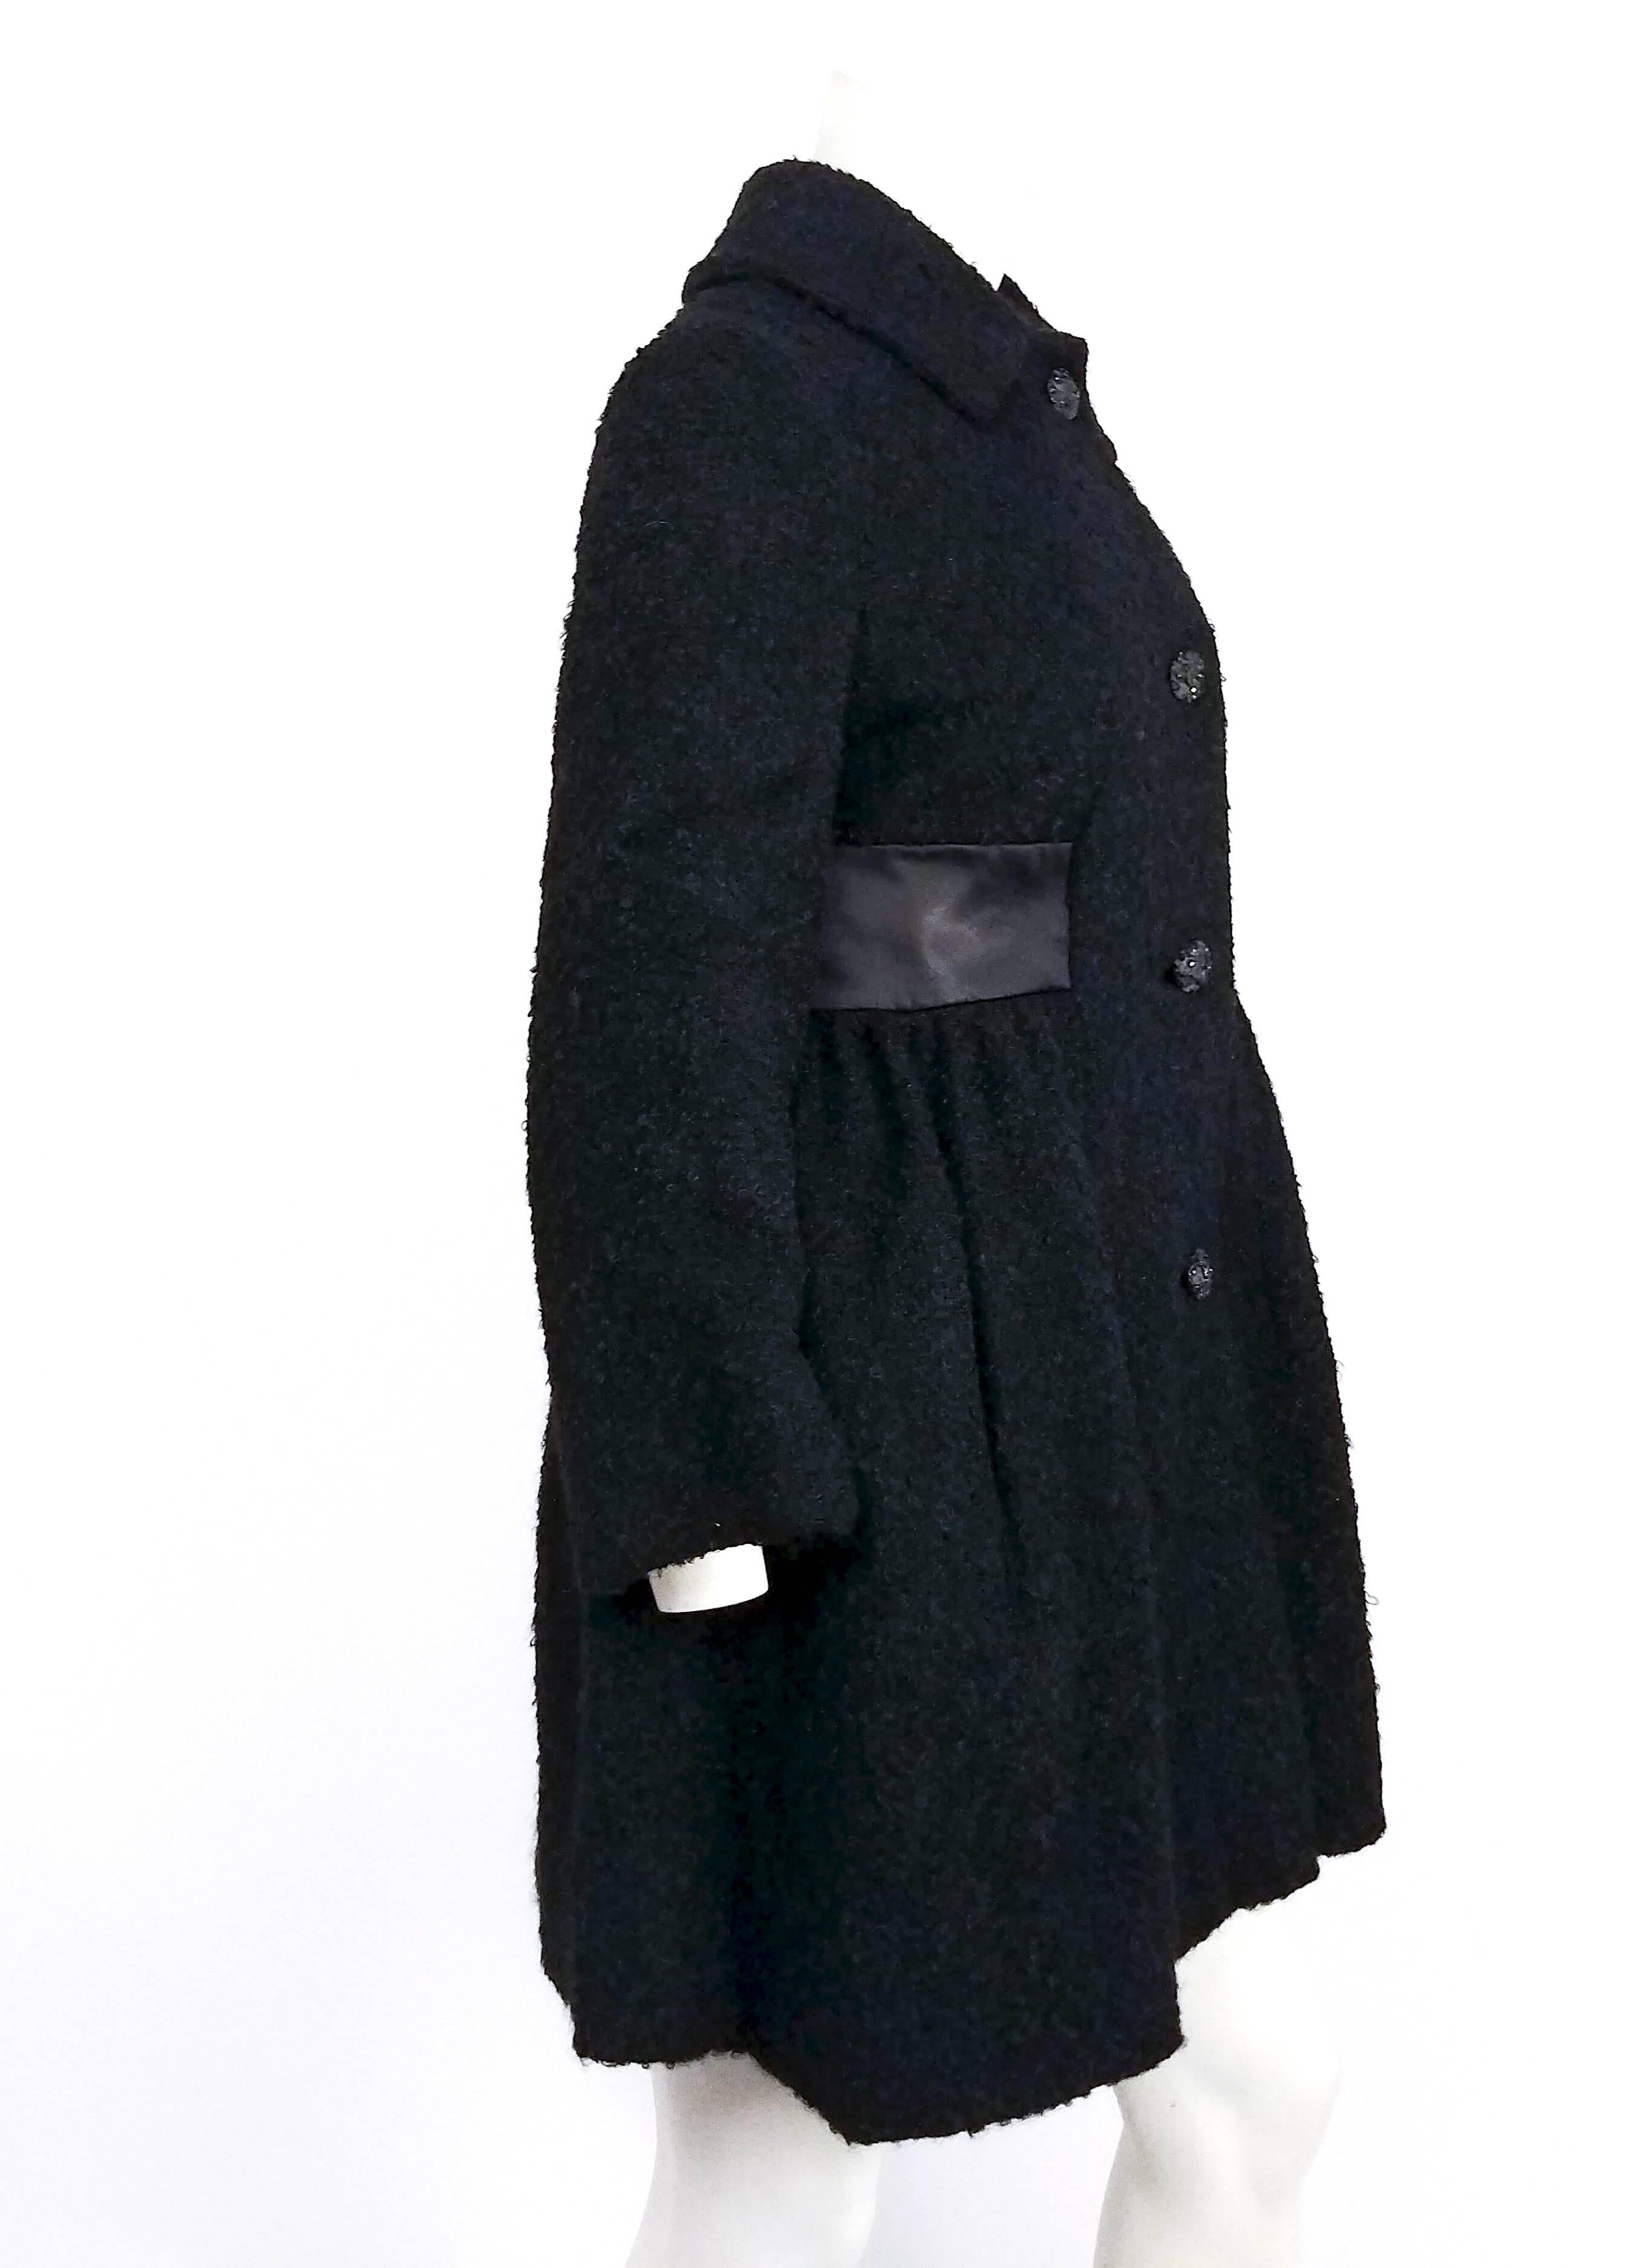 1960s Black Boiled Wool Short Coat. Satin waist detail, gathered skirt of coat flares out in A-line silhouette. Decorative black buttons. 